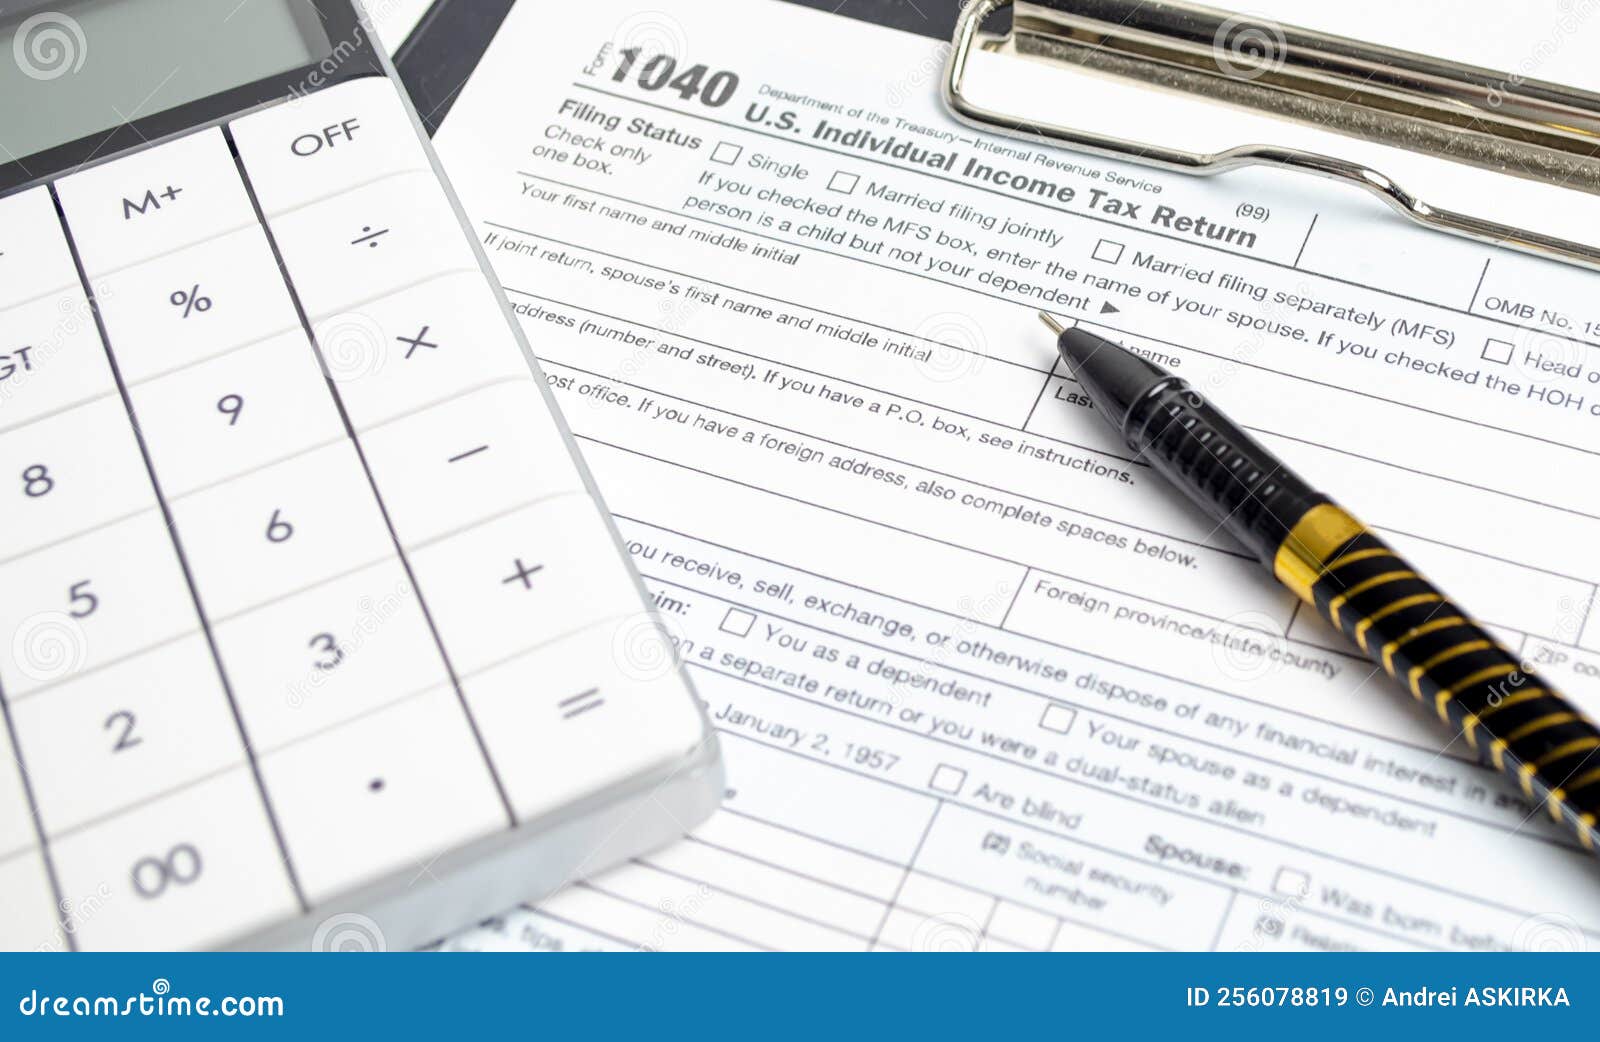 tax-return-1040-calculator-and-pen-tax-concept-editorial-stock-image